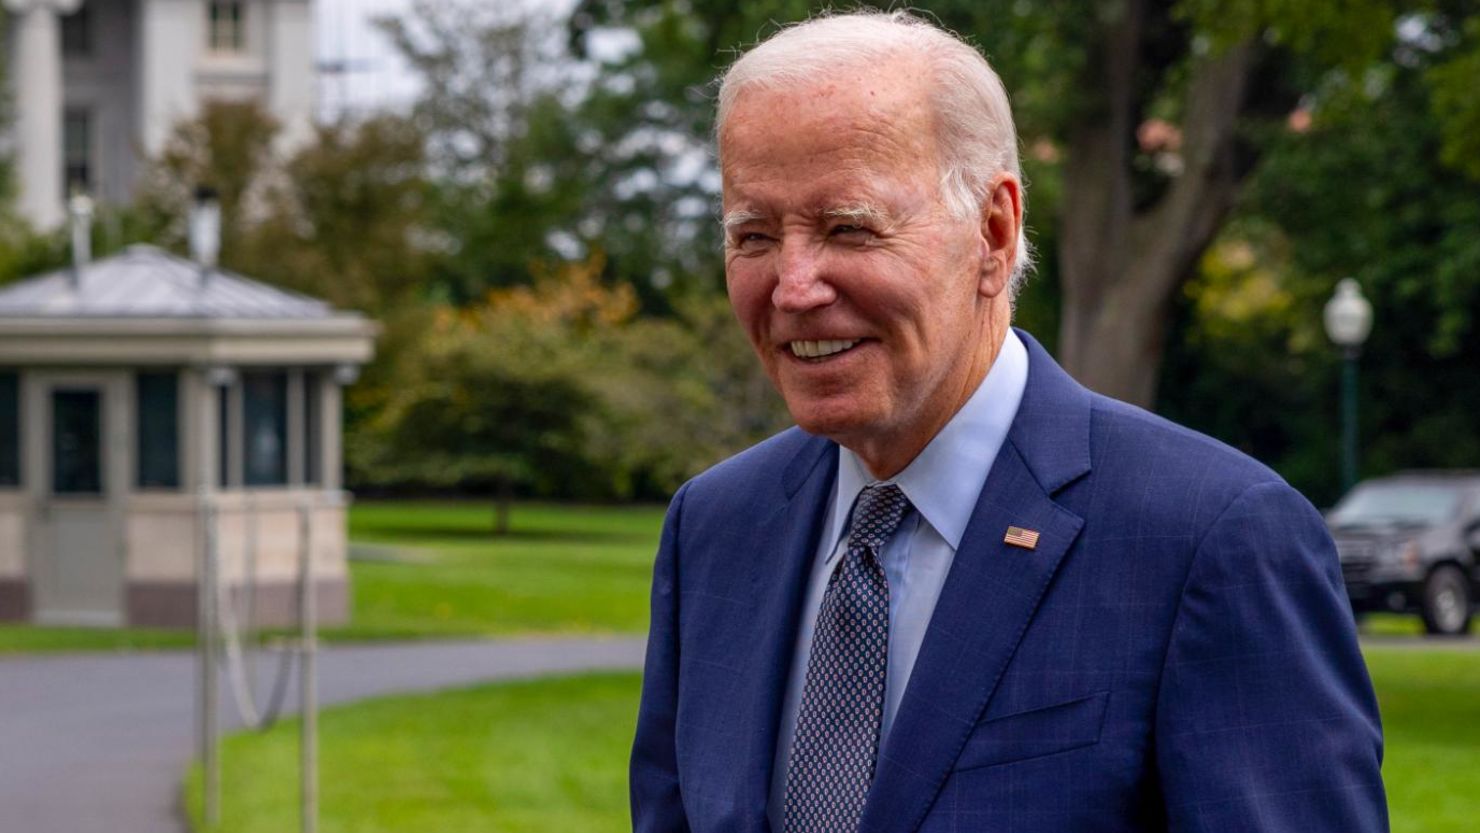 WASHINGTON, DC - SEPTEMBER 17: U.S. President Joe Biden walks into the White House on September 17, 2023 in Washington, DC. The President spent the weekend in Delaware and is heading to New York City later in the day for the United Nations General Assembly. (Photo by Tasos Katopodis/Getty Images)